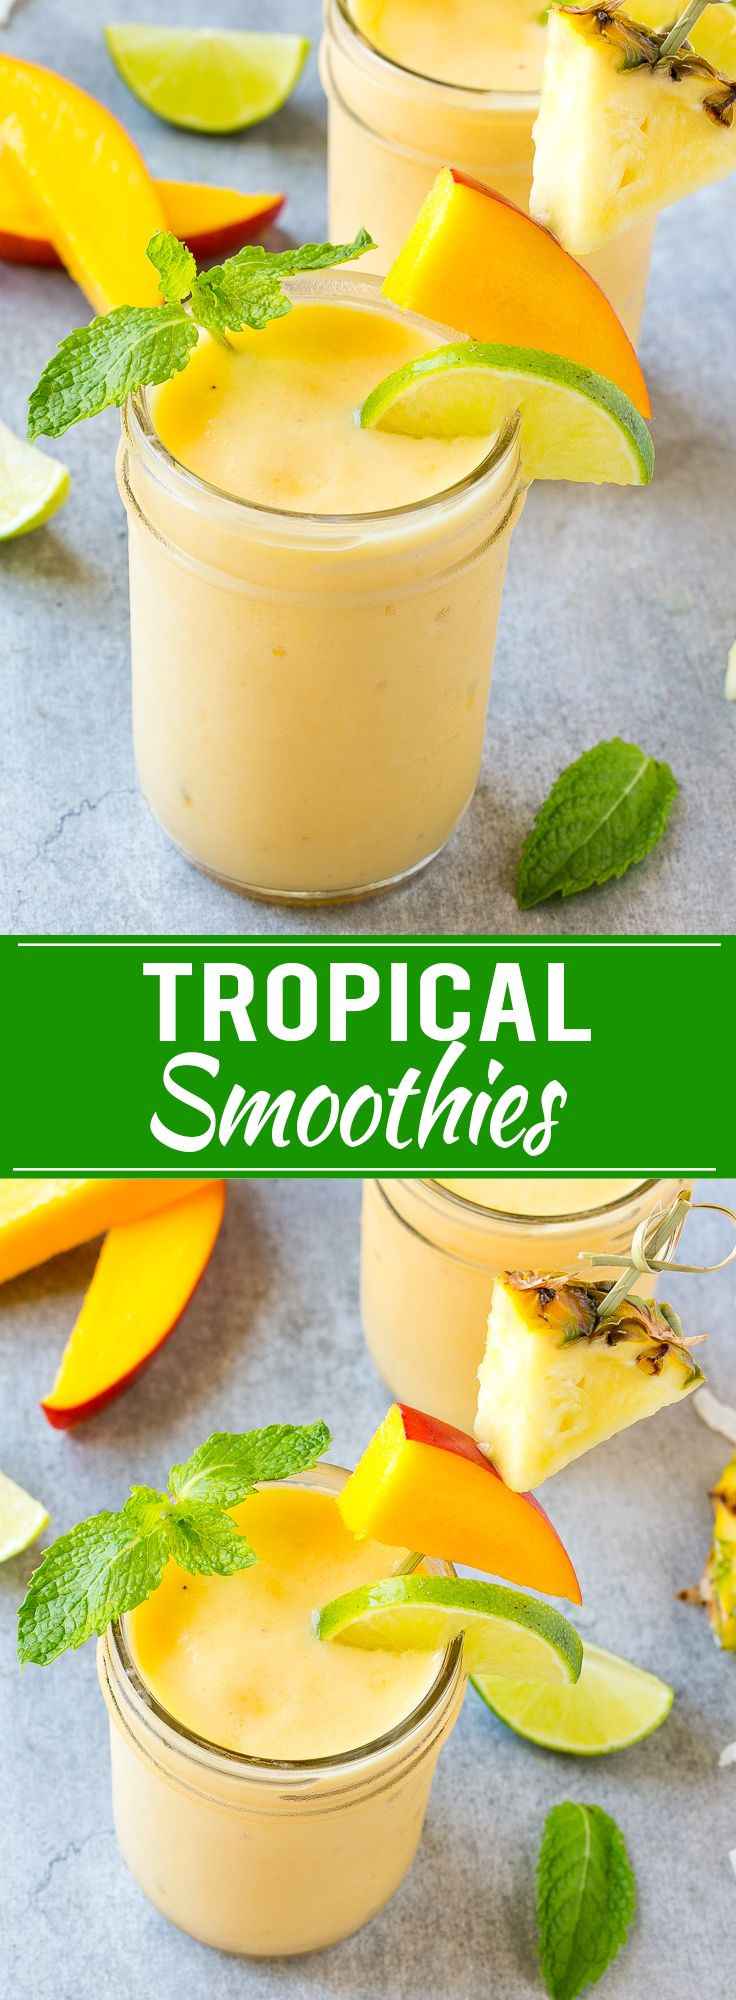 Easy Healthy Smoothie Recipes
 Best 25 Tropical smoothie recipes ideas on Pinterest